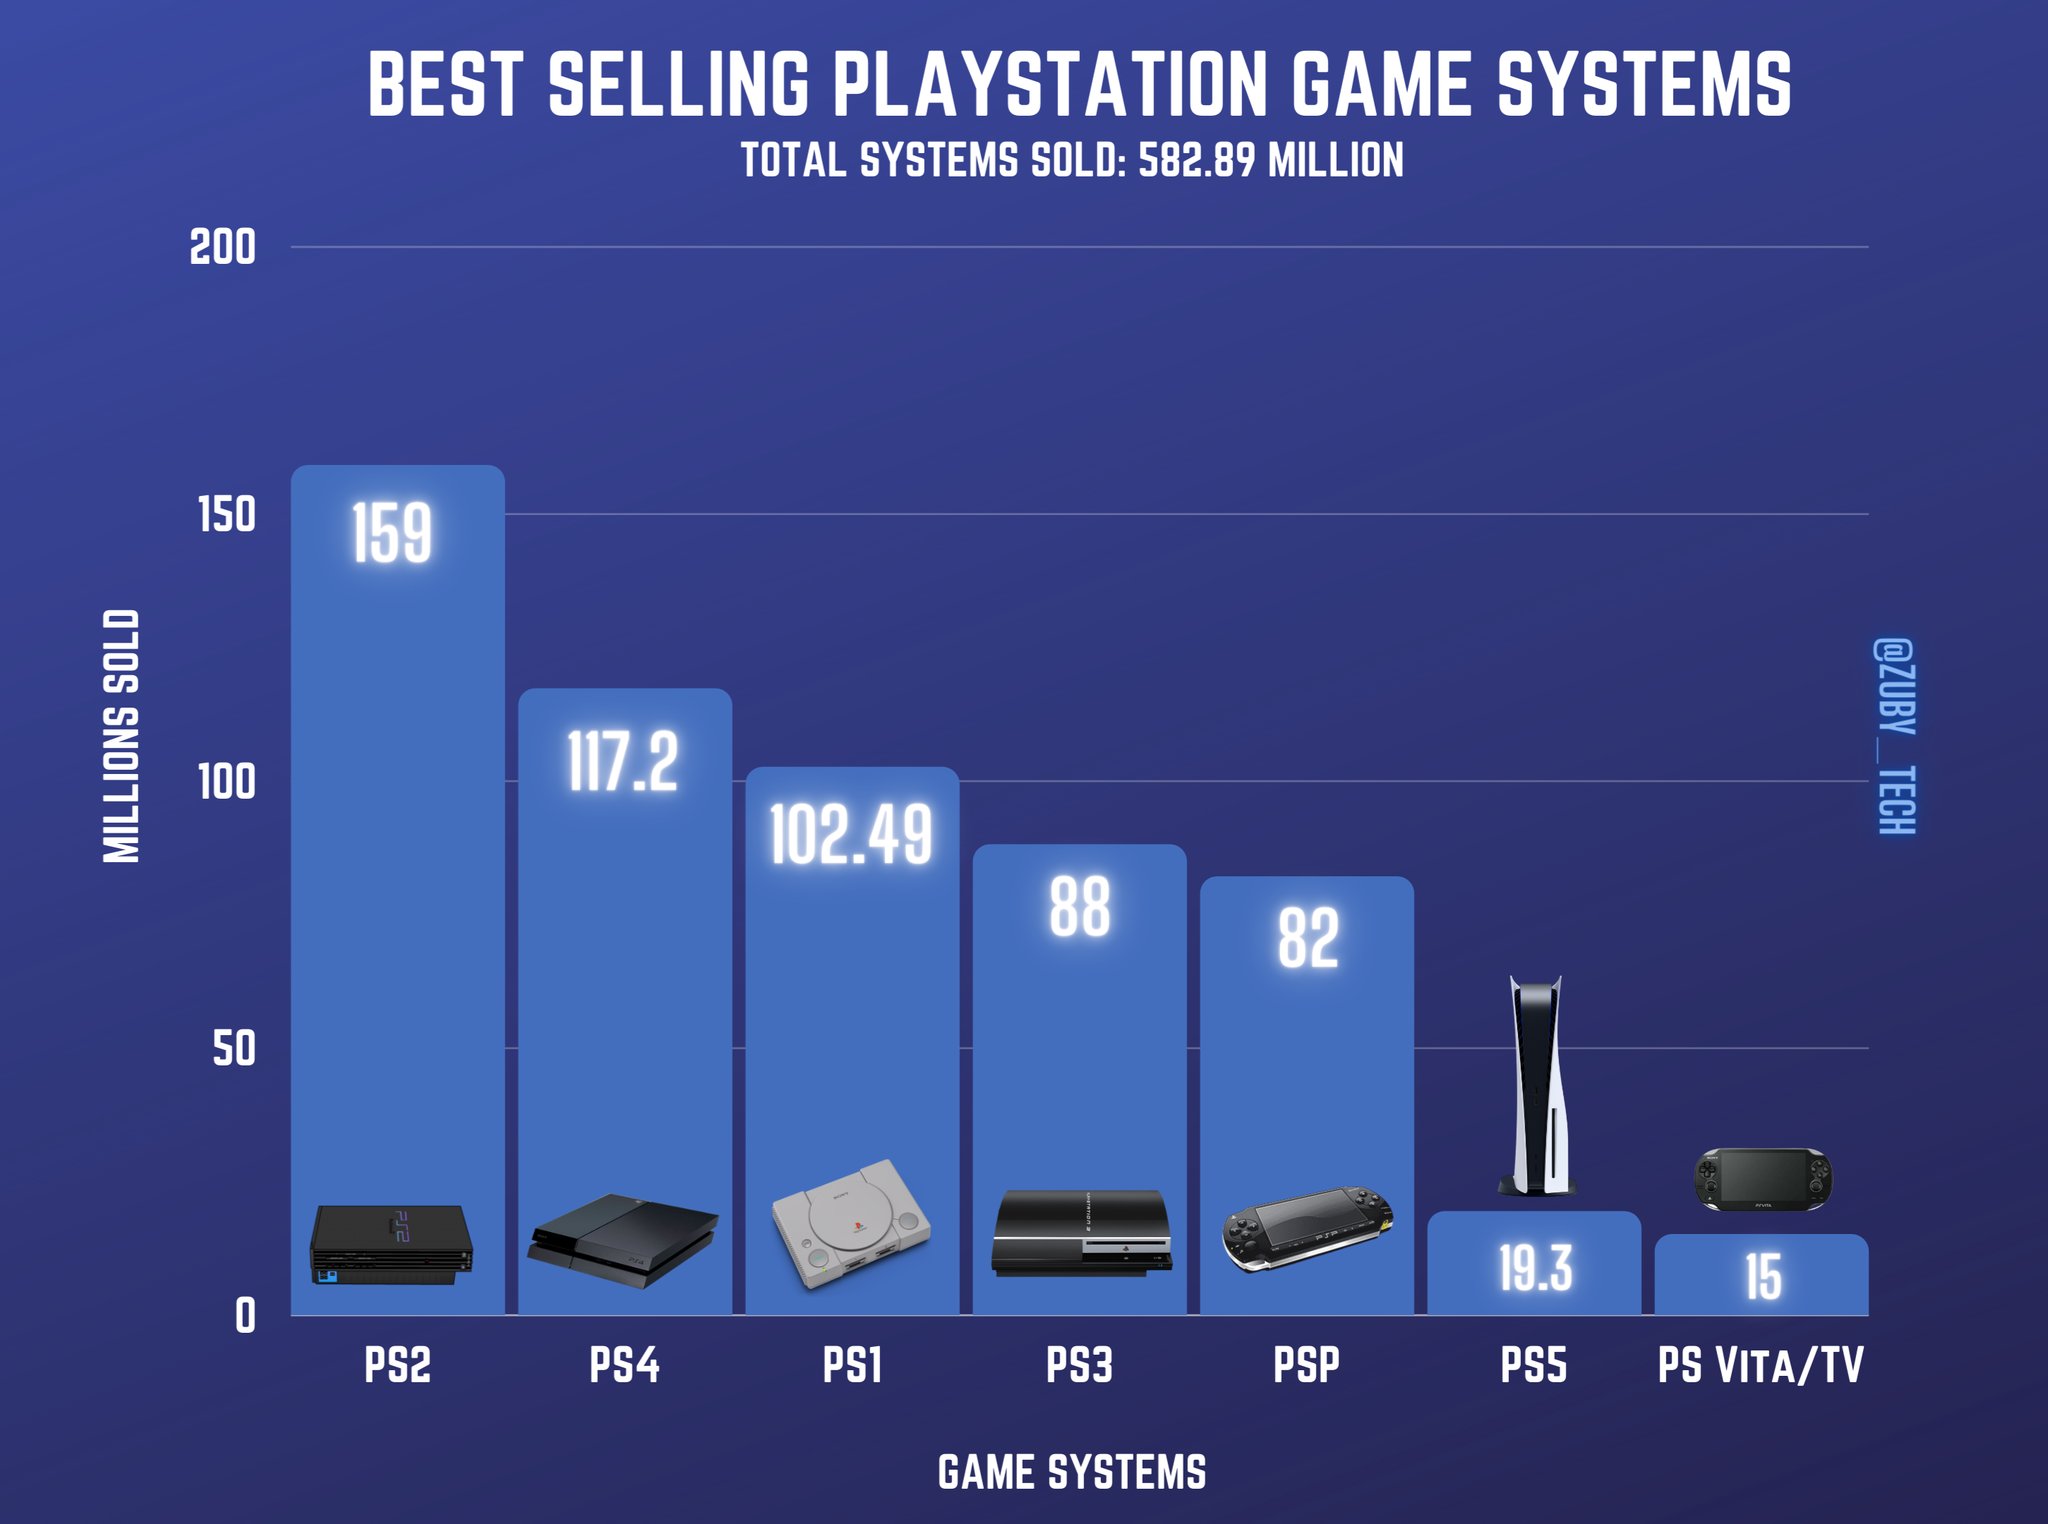 forsendelse Blive ved os selv Zuby_Tech on Twitter: "All Time Best Selling PlayStation Game Systems:  PlayStation Is Fast Approaching 600 Million Total Game Systems Units Sold  Lifetime! #PlayStation #Game #Games #Gaming #PlayStation5 #PS5  https://t.co/lNXsmKmf69" / Twitter